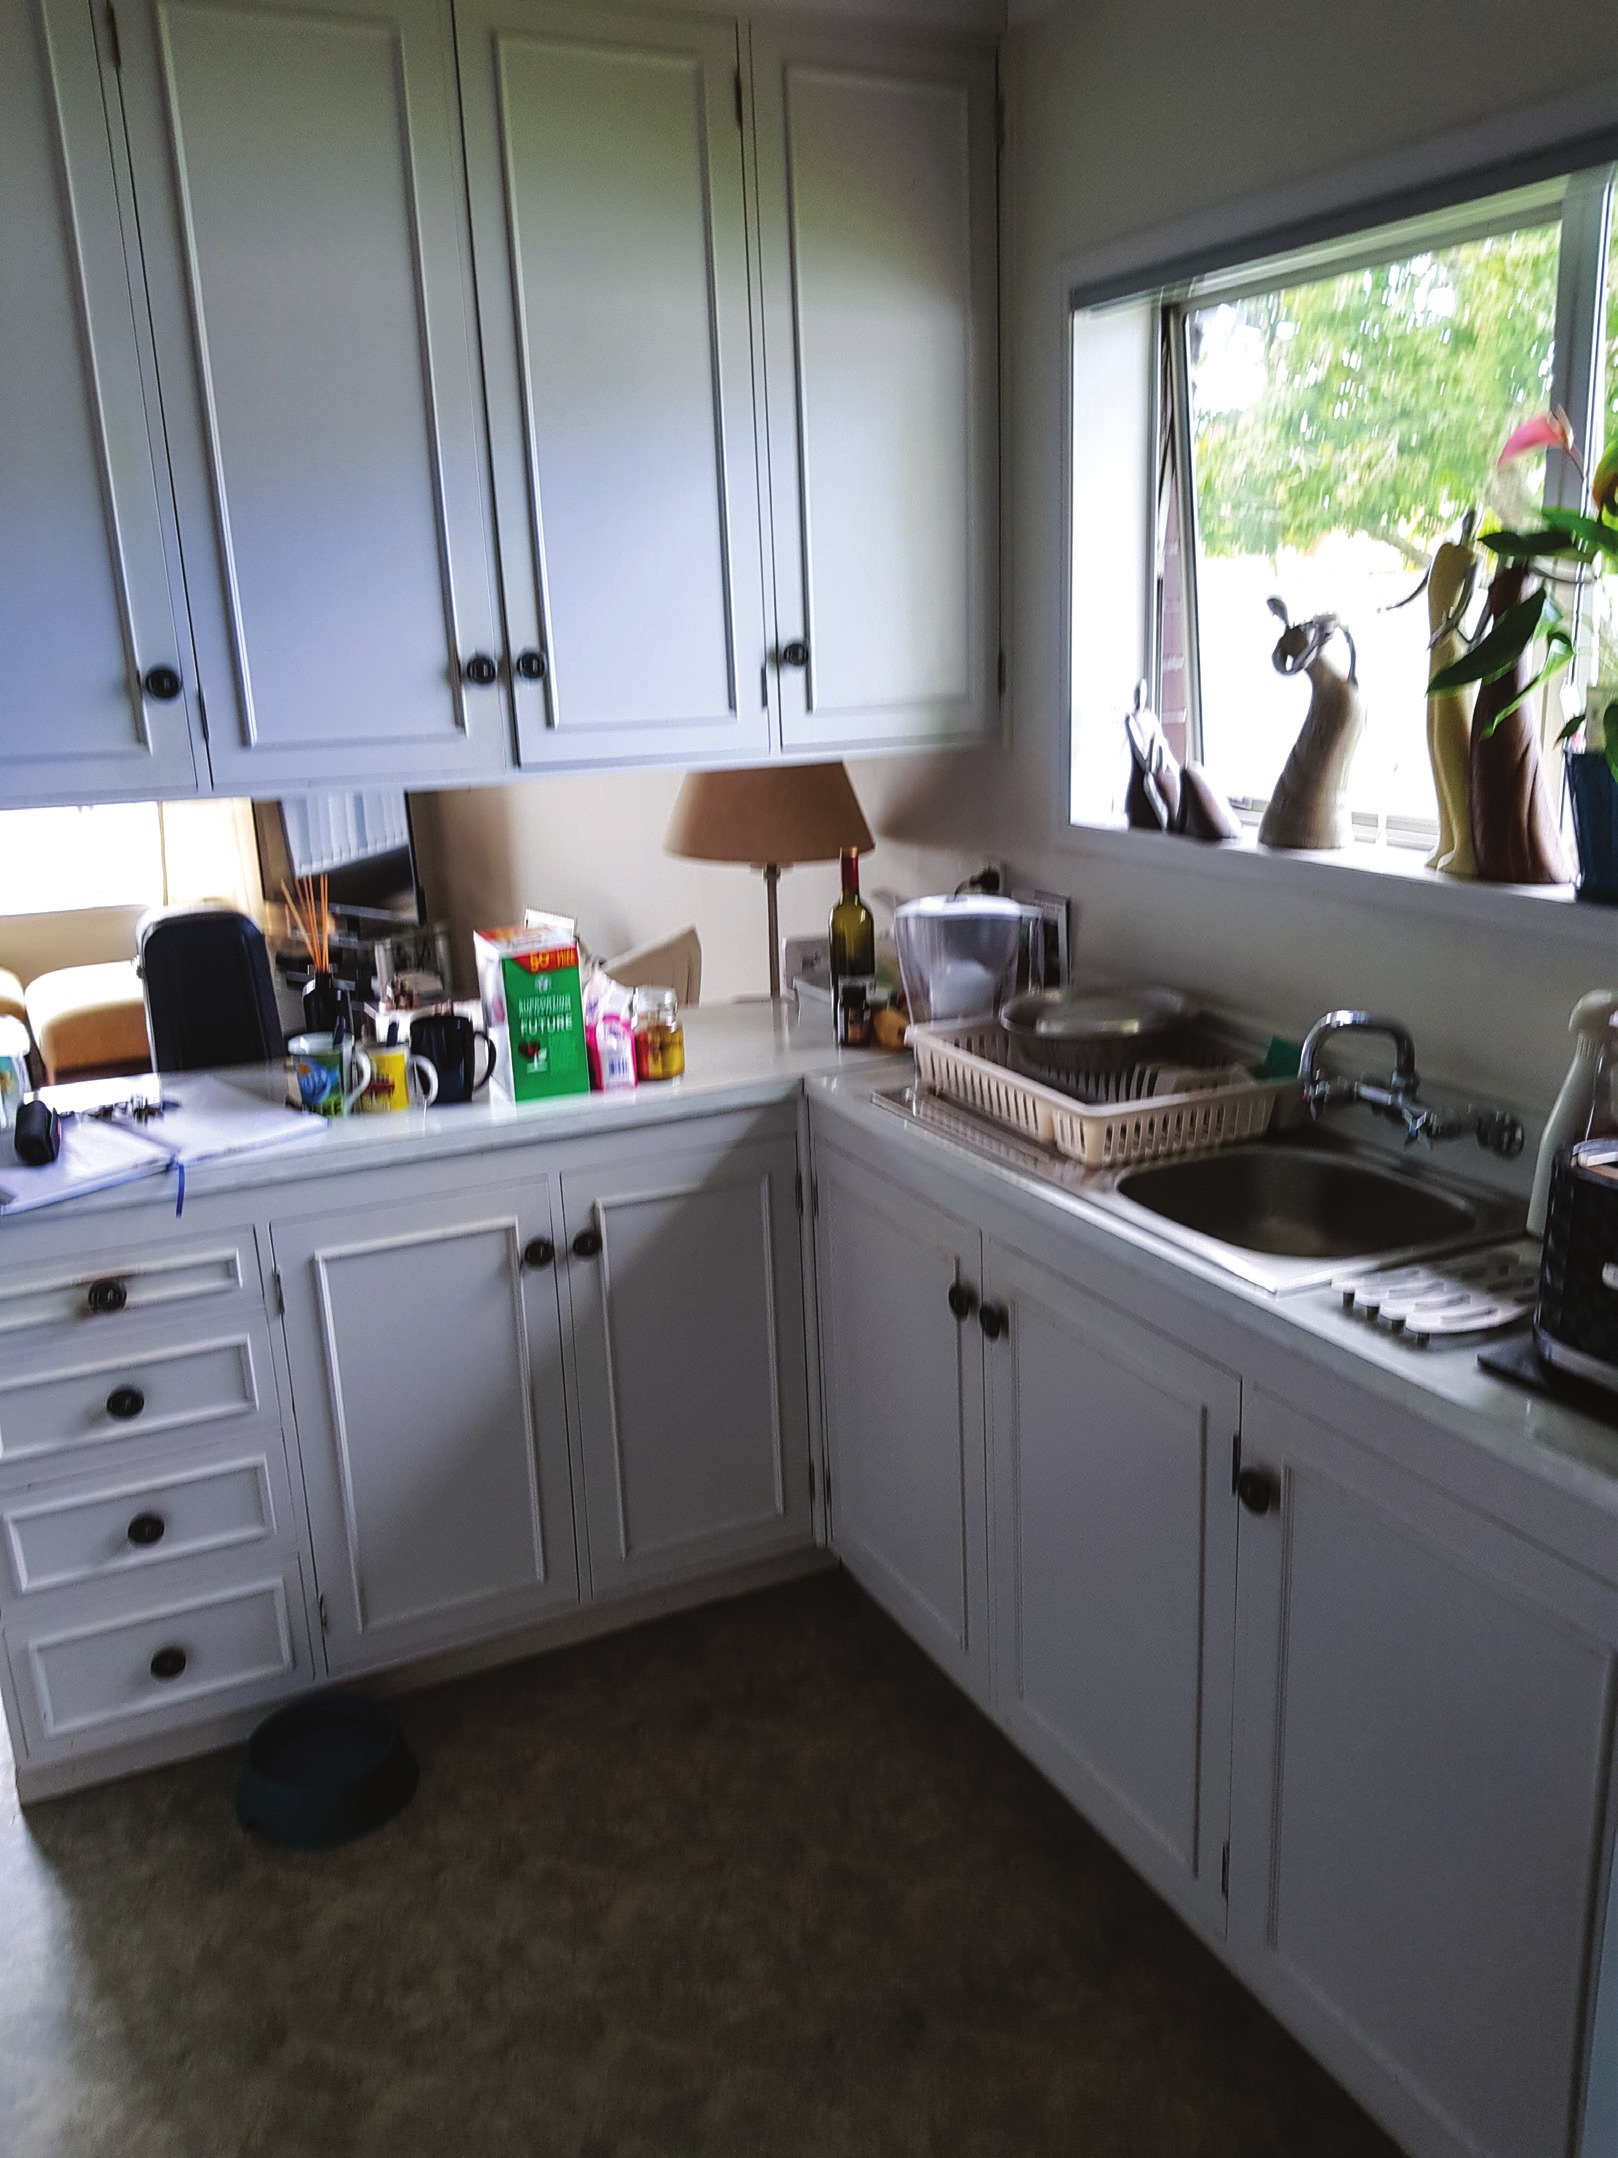  The old existing kitchen was dated and darkened by the ceiling-hung units 